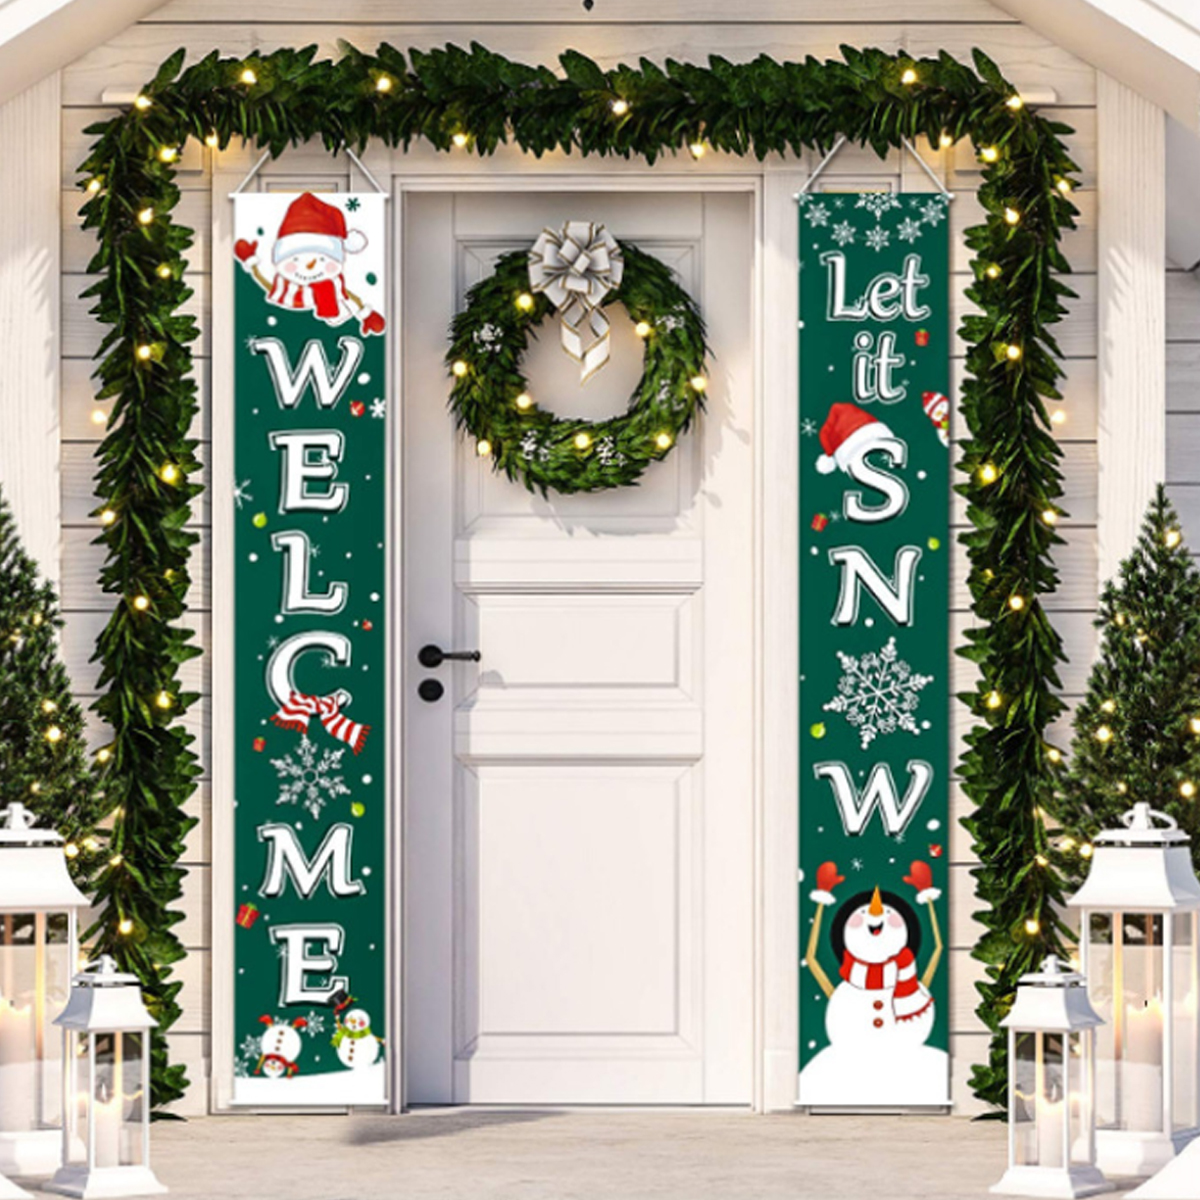 Merry-Christmas-Porch-Banner-Xmas-Outdoor-Decoration-Couplet-Hanging-Cloth-Door-Hanging-Ornaments-fo-1785753-3